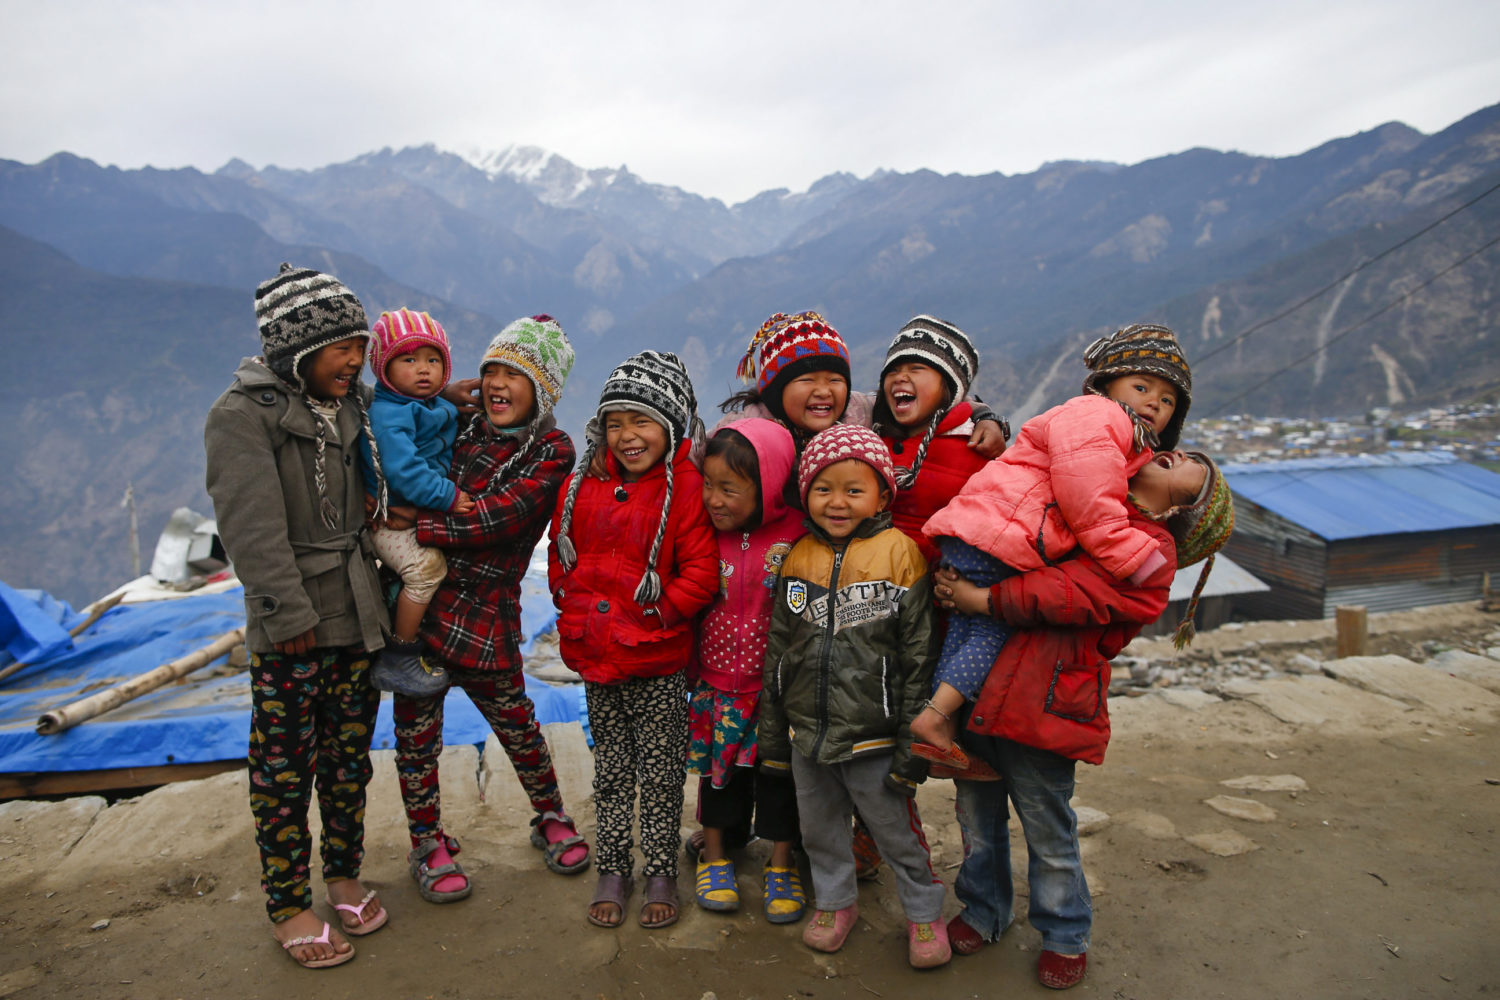 On 18 January 2016, children laugh in Barpak village, Gorkha district, Nepal. Barpak is an epicenteral village of Gorkha district, where more than 1400 hundreds houses were destroyed during the earthquake on 25 April 2015. Hundreds of earthquake victims, particularly the elderly and young children living in shelter of highland altitude have been facing a harsh winter season after snowfall.